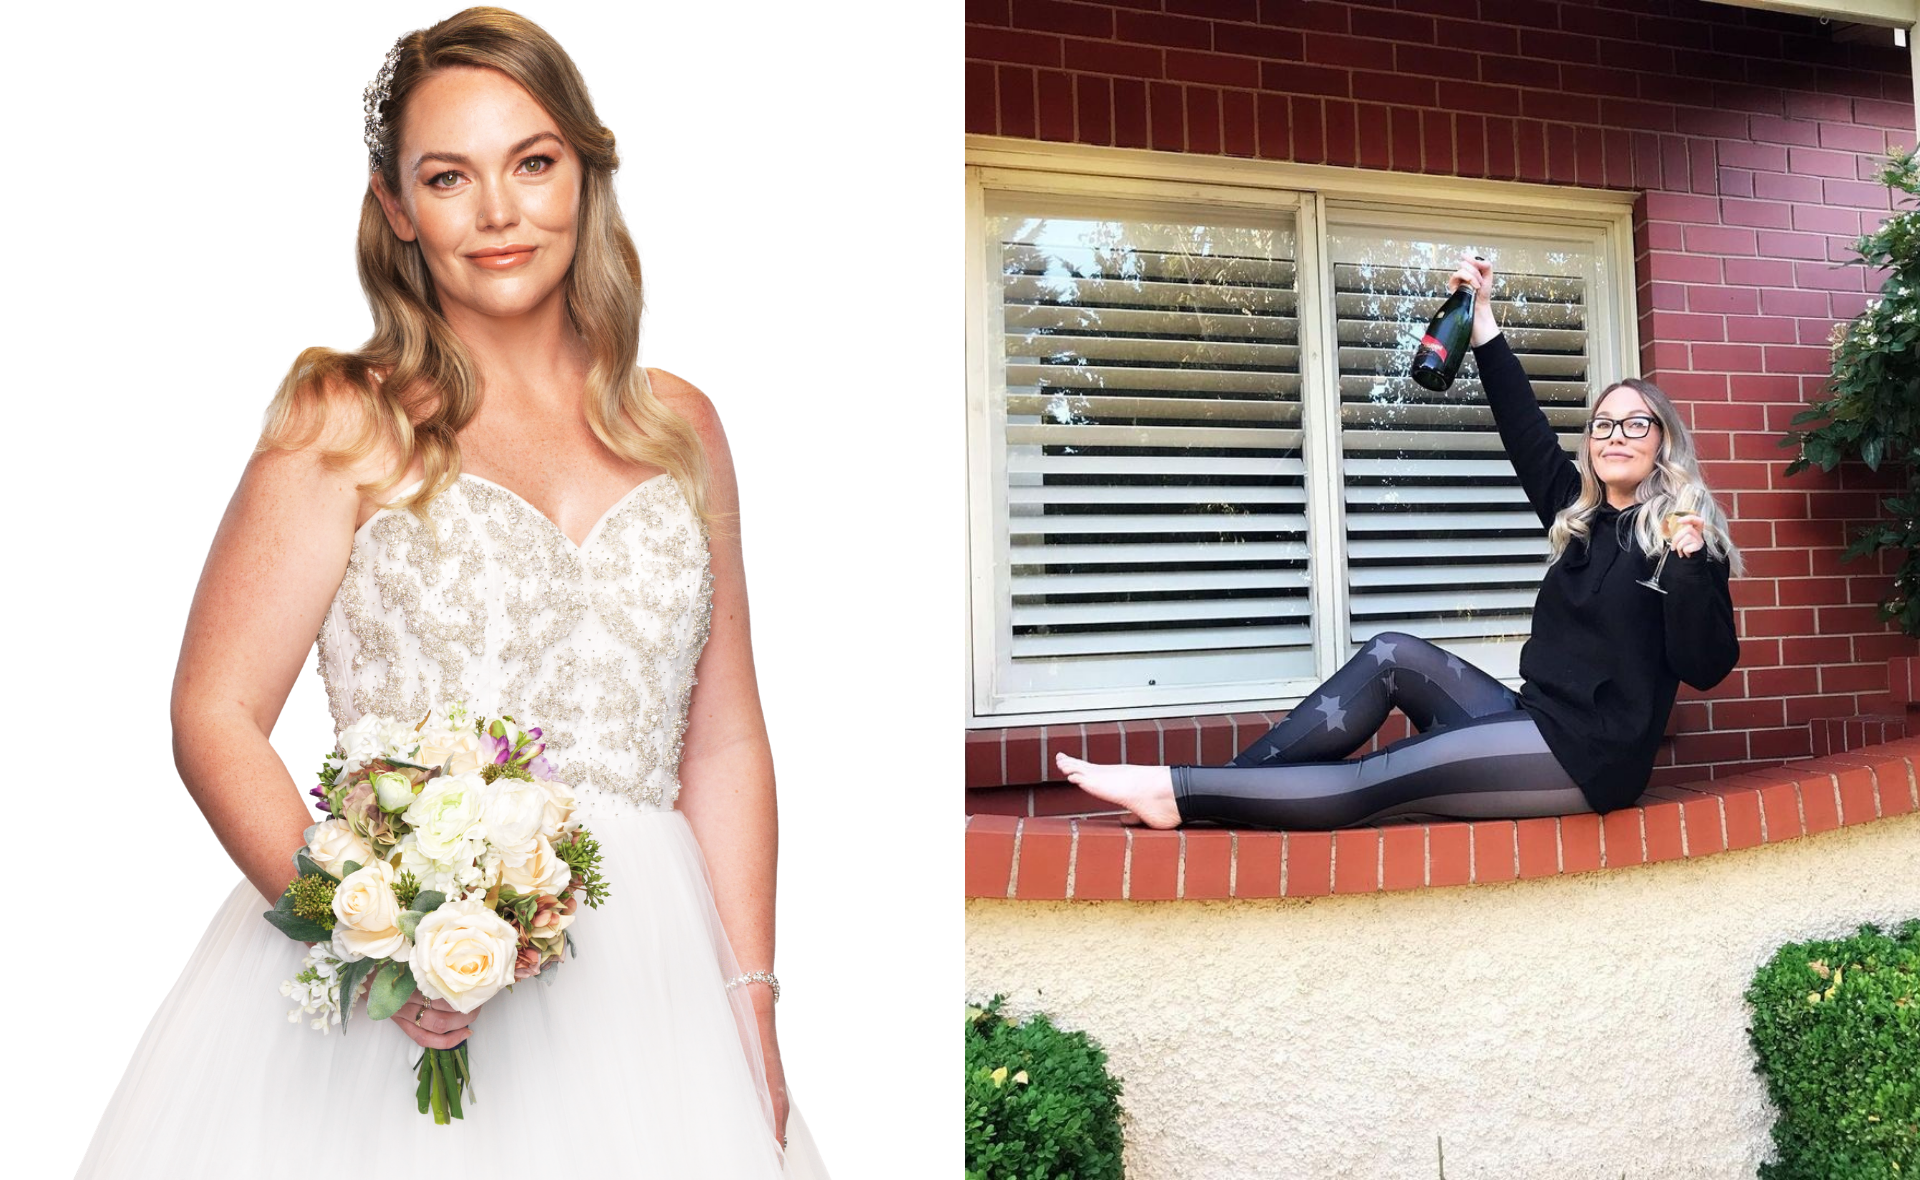 “I’ve never been on a single date!” – MAFS bride Melissa spills on her awkward relationship history